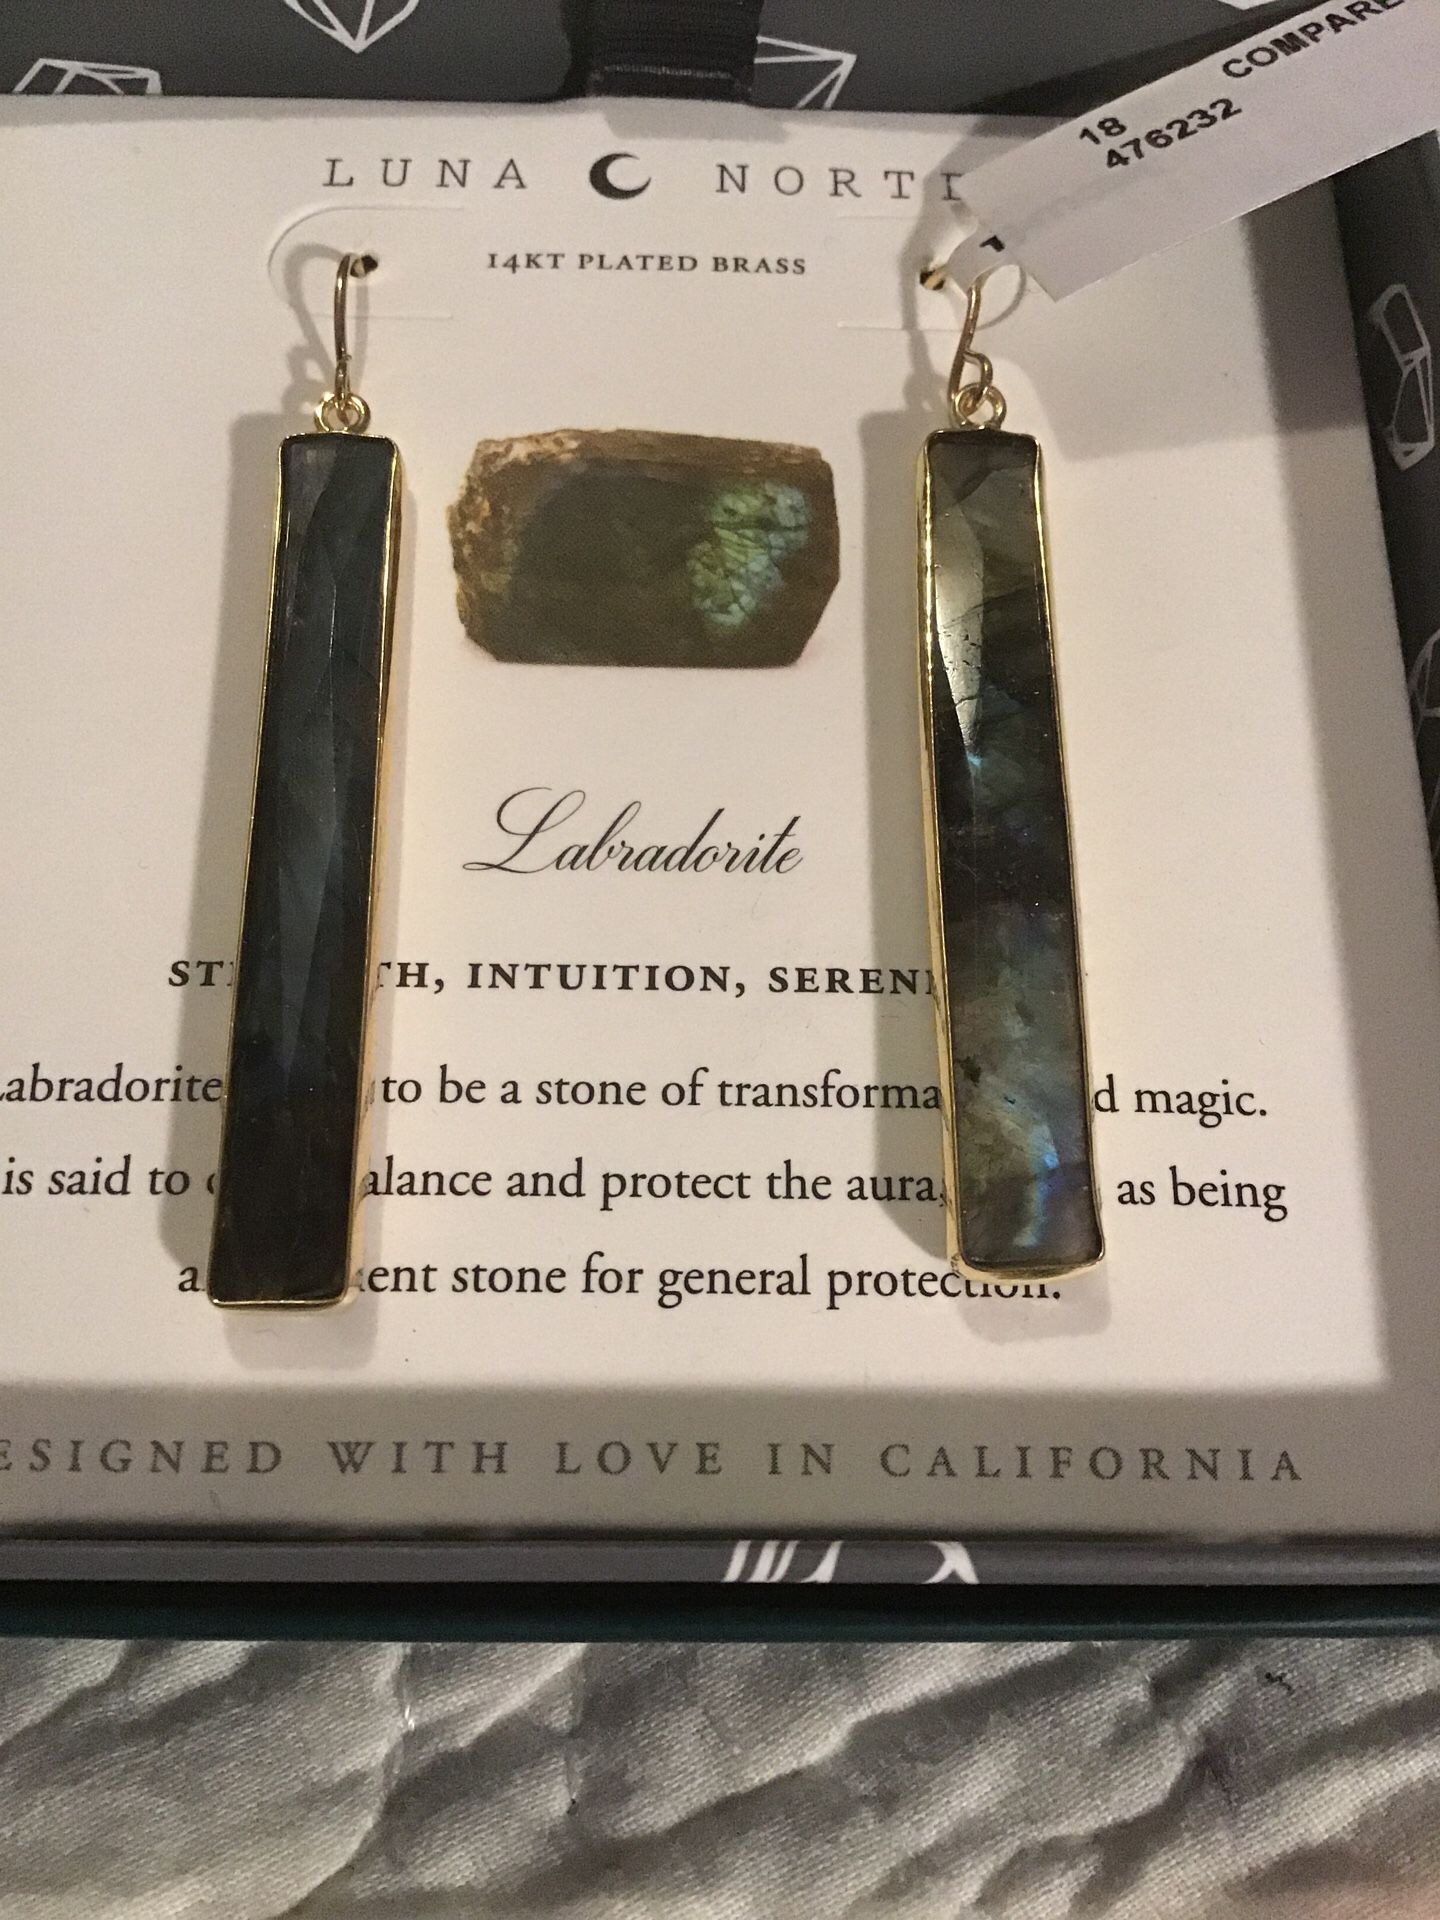 BY LUNA NORTE 14 k PLATED. BRASS EARRINGS WITH LABRADORITE STONES BEAUTIFUL !!